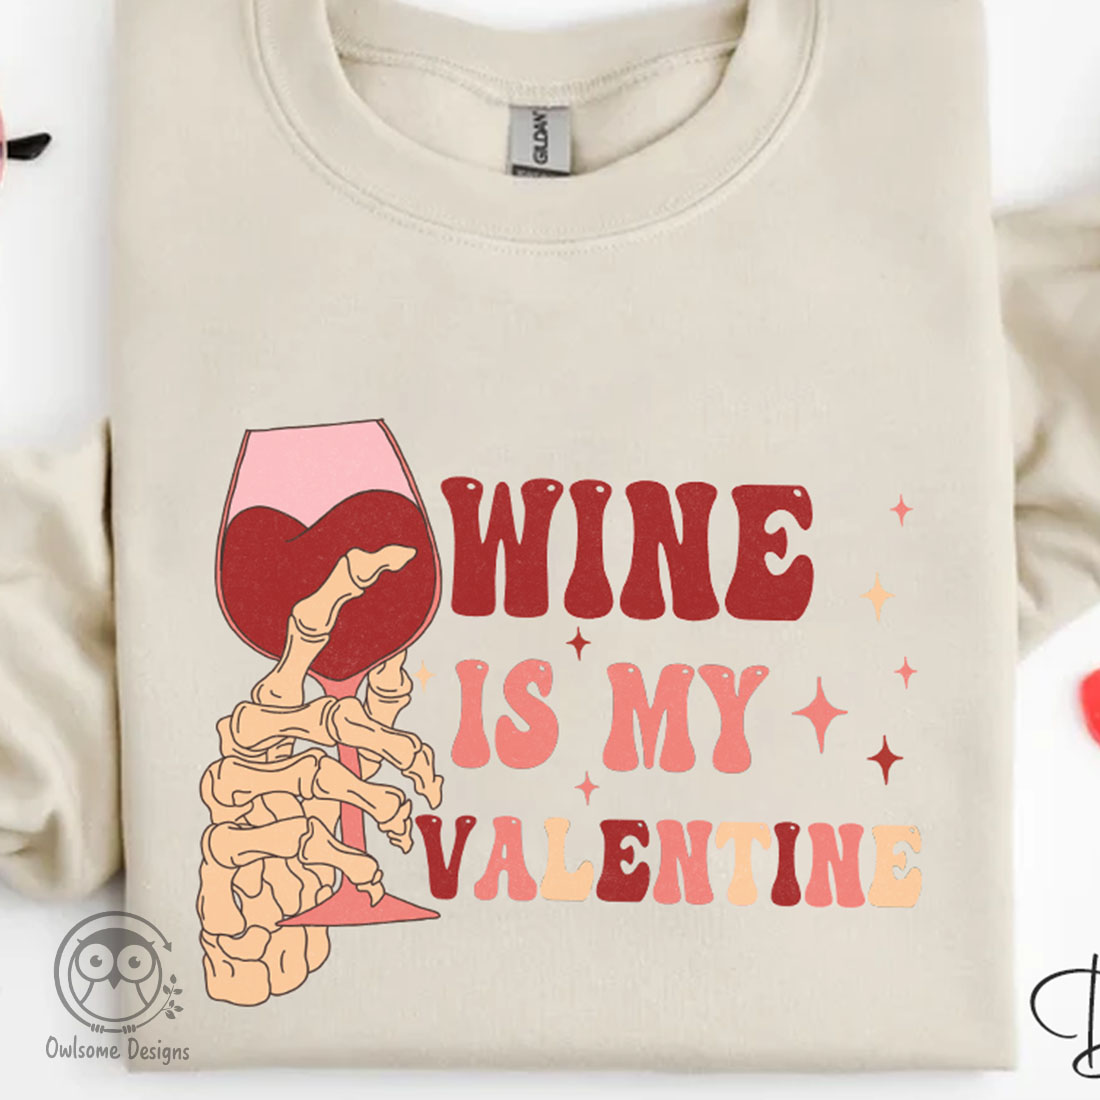 Image of a t-shirt with a colorful print skeleton hands with a glass of wine.